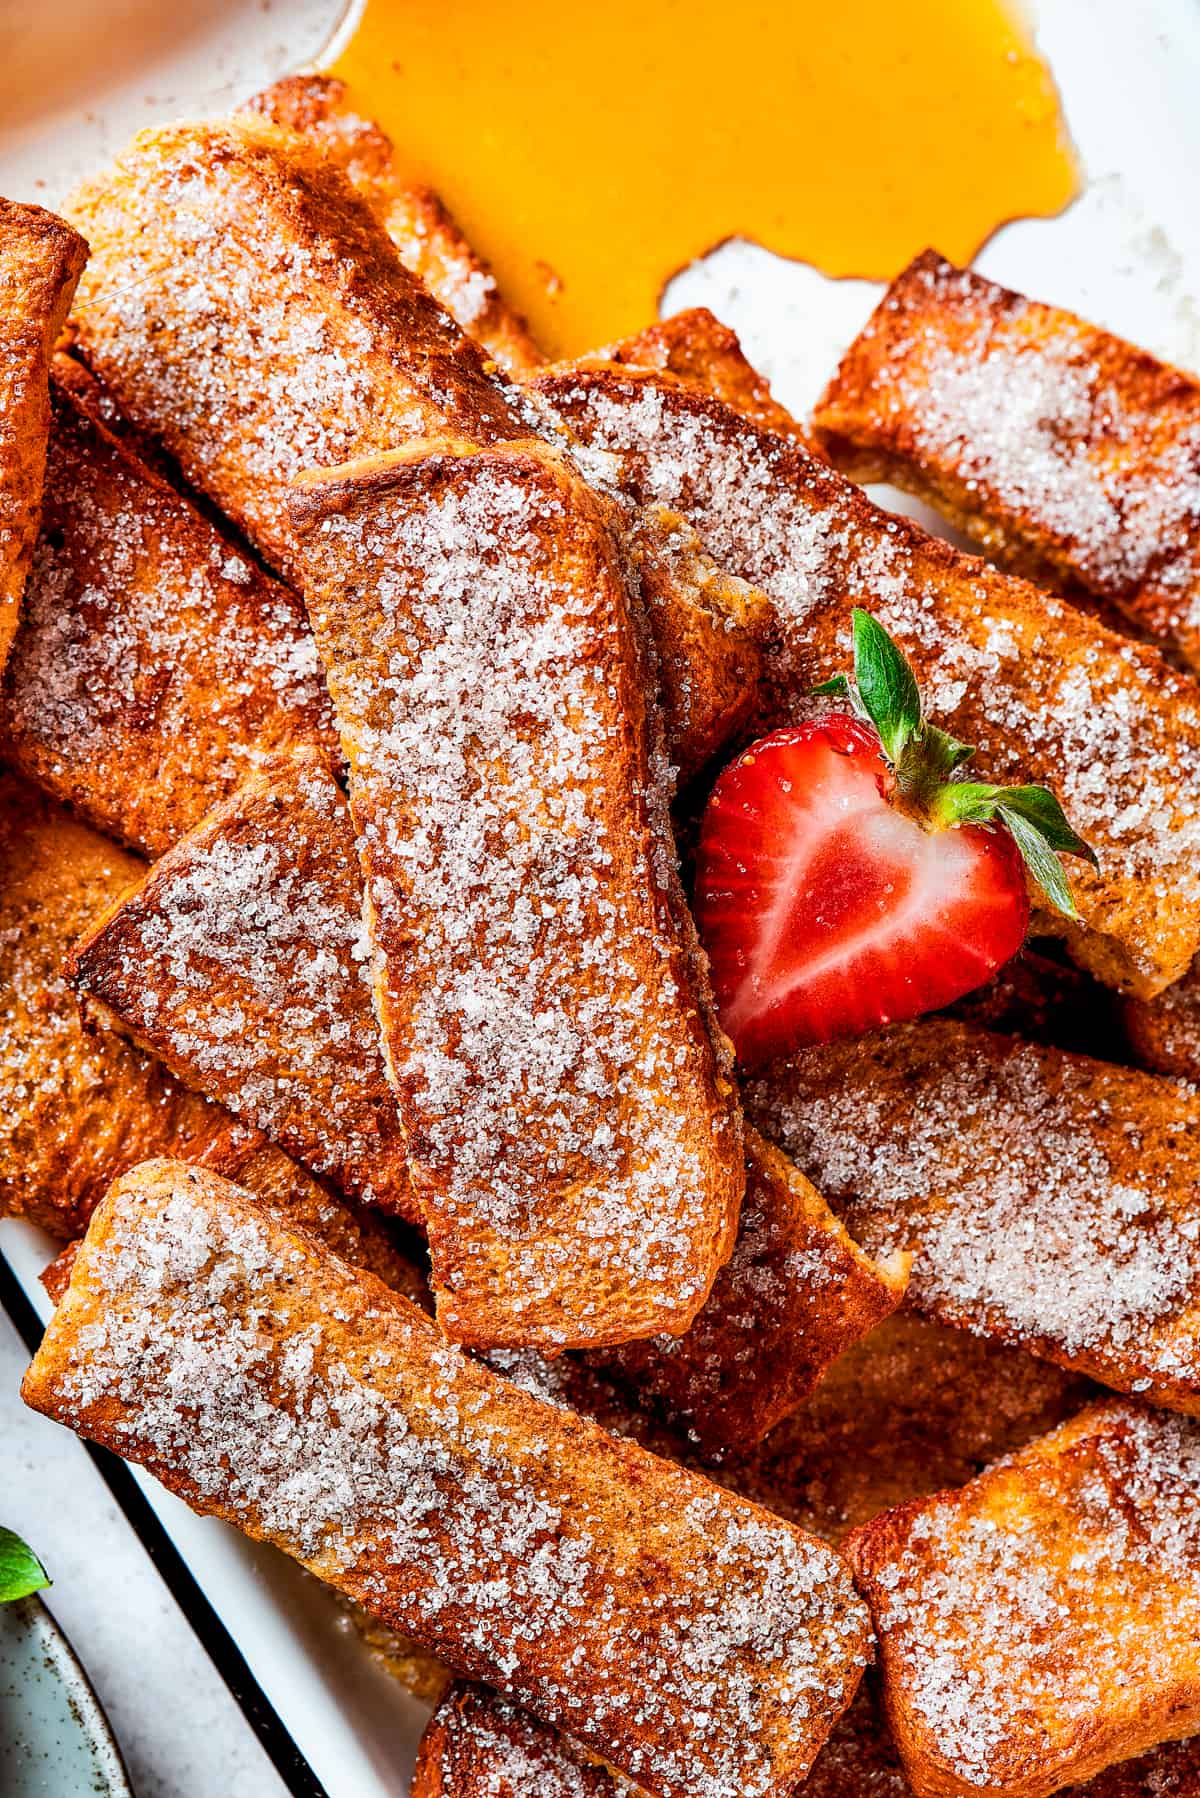 A shot of cinnamon-sugar-coated French toast sticks arranged on a white plate.